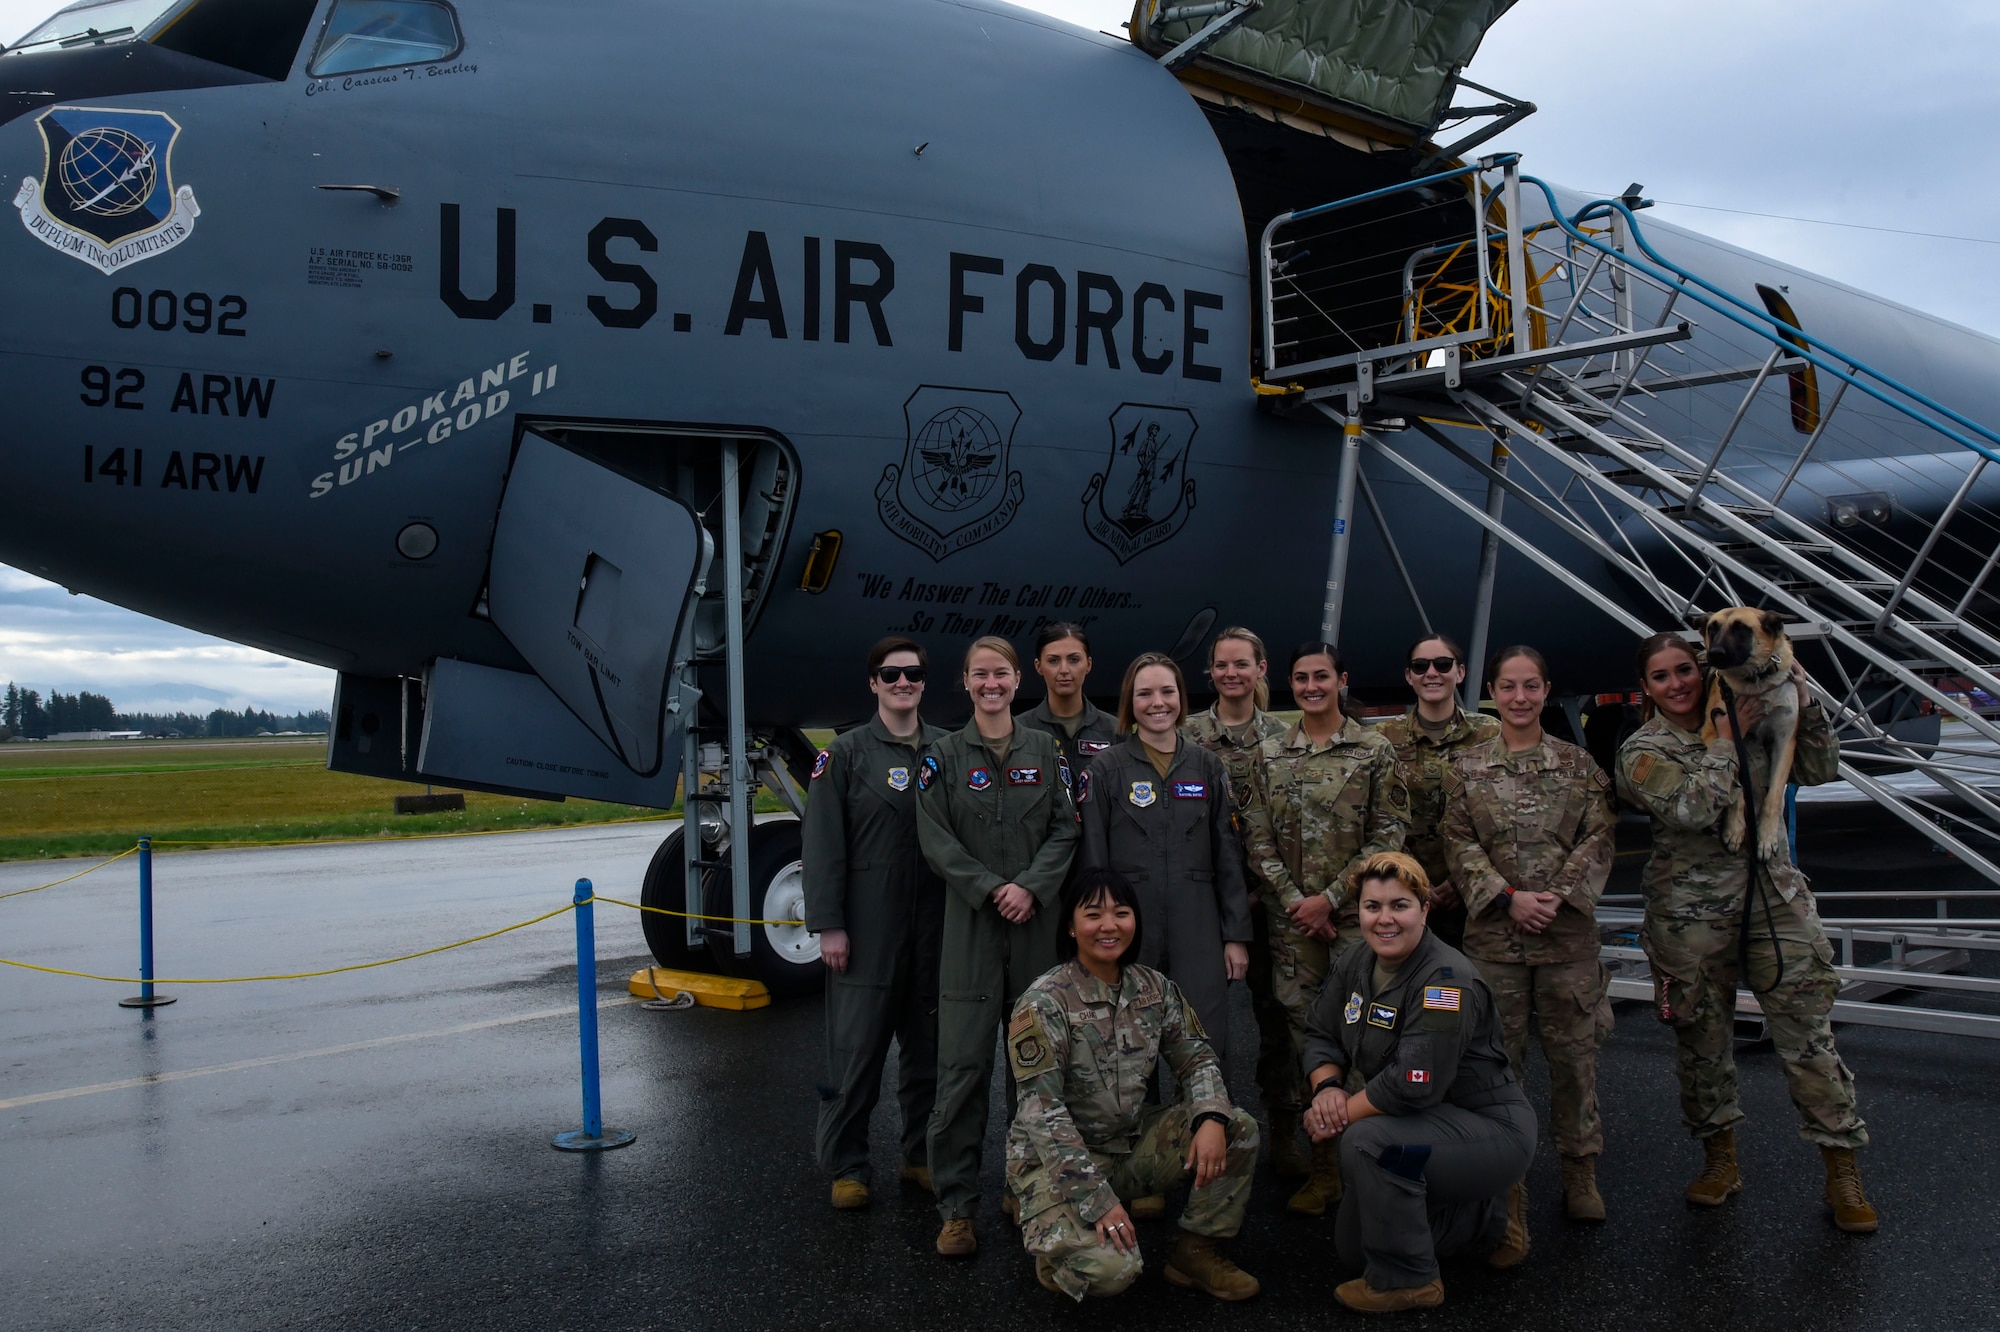 An all-female crew from Fairchild Air Force Base pose in front of a KC-135 Stratotanker during “The Sky’s No Limit: Girls Fly Too” event in Abbotsford, Canada, Oct. 3, 2021. The event gave Airmen from Fairchild an opportunity to empower young ladies, and inspire them to pursue various career opportunities. (U.S. Air Force photo by 2nd Lt. Michelle Chang)